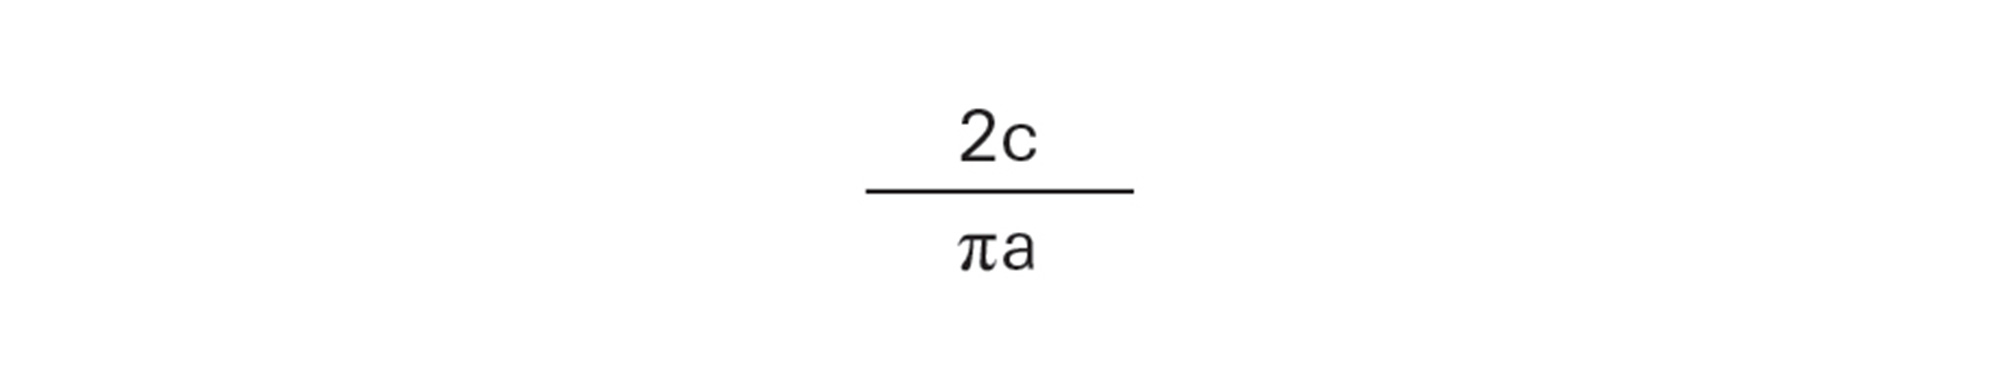 A mathematical equation that shows M divided by N is equal to 2c divided by pi multiplied by a.